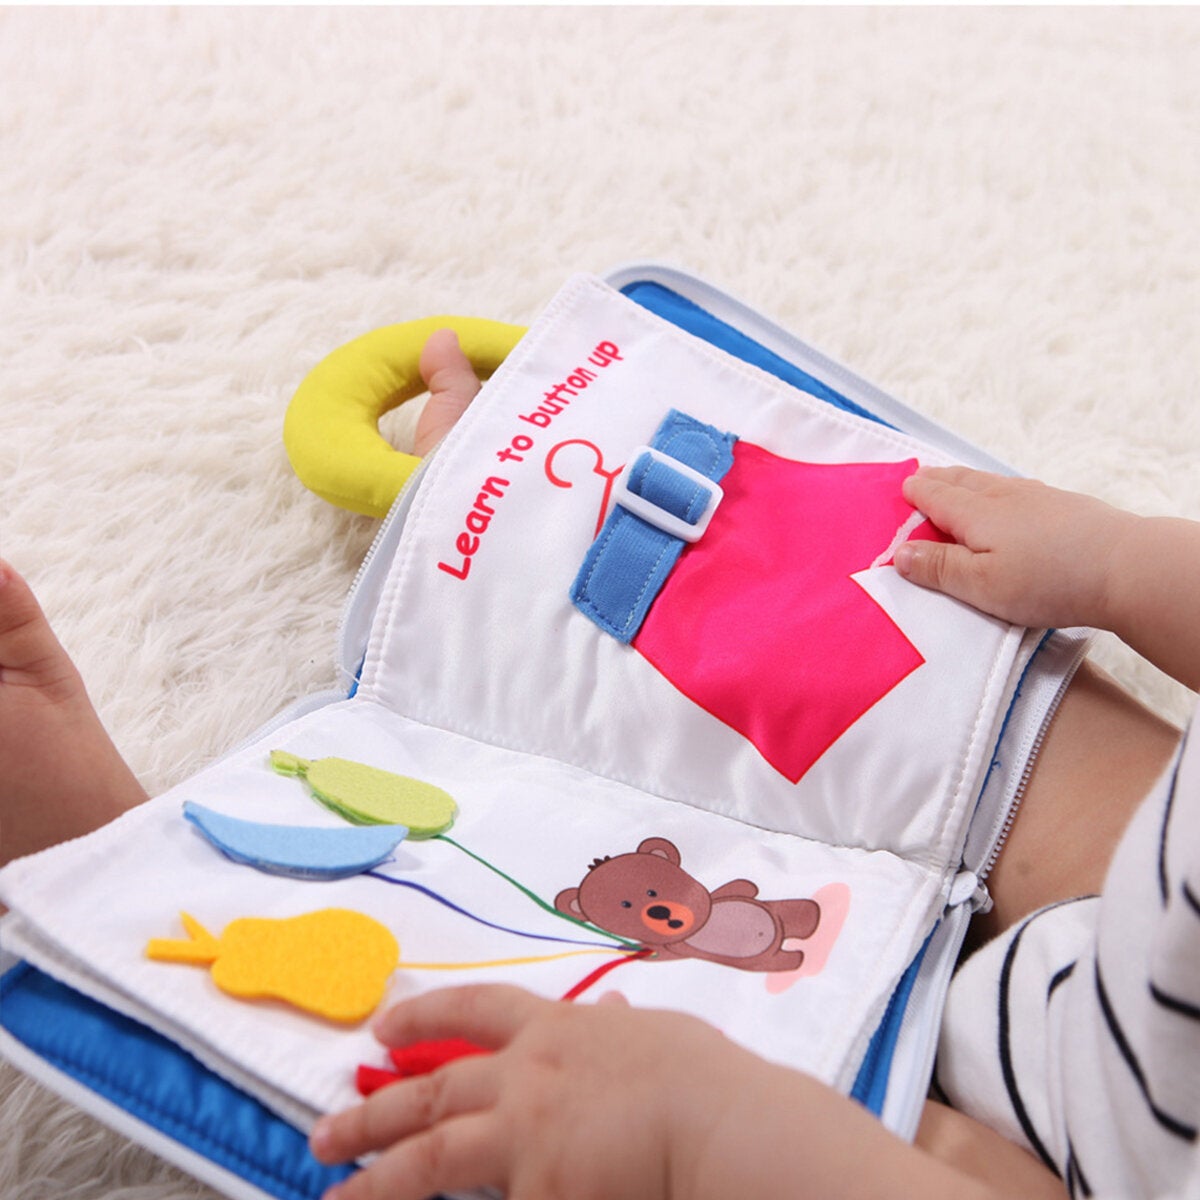 Infant Early Education Soft Cloth Books Baby Learning Activity Practice Hands Book Toys